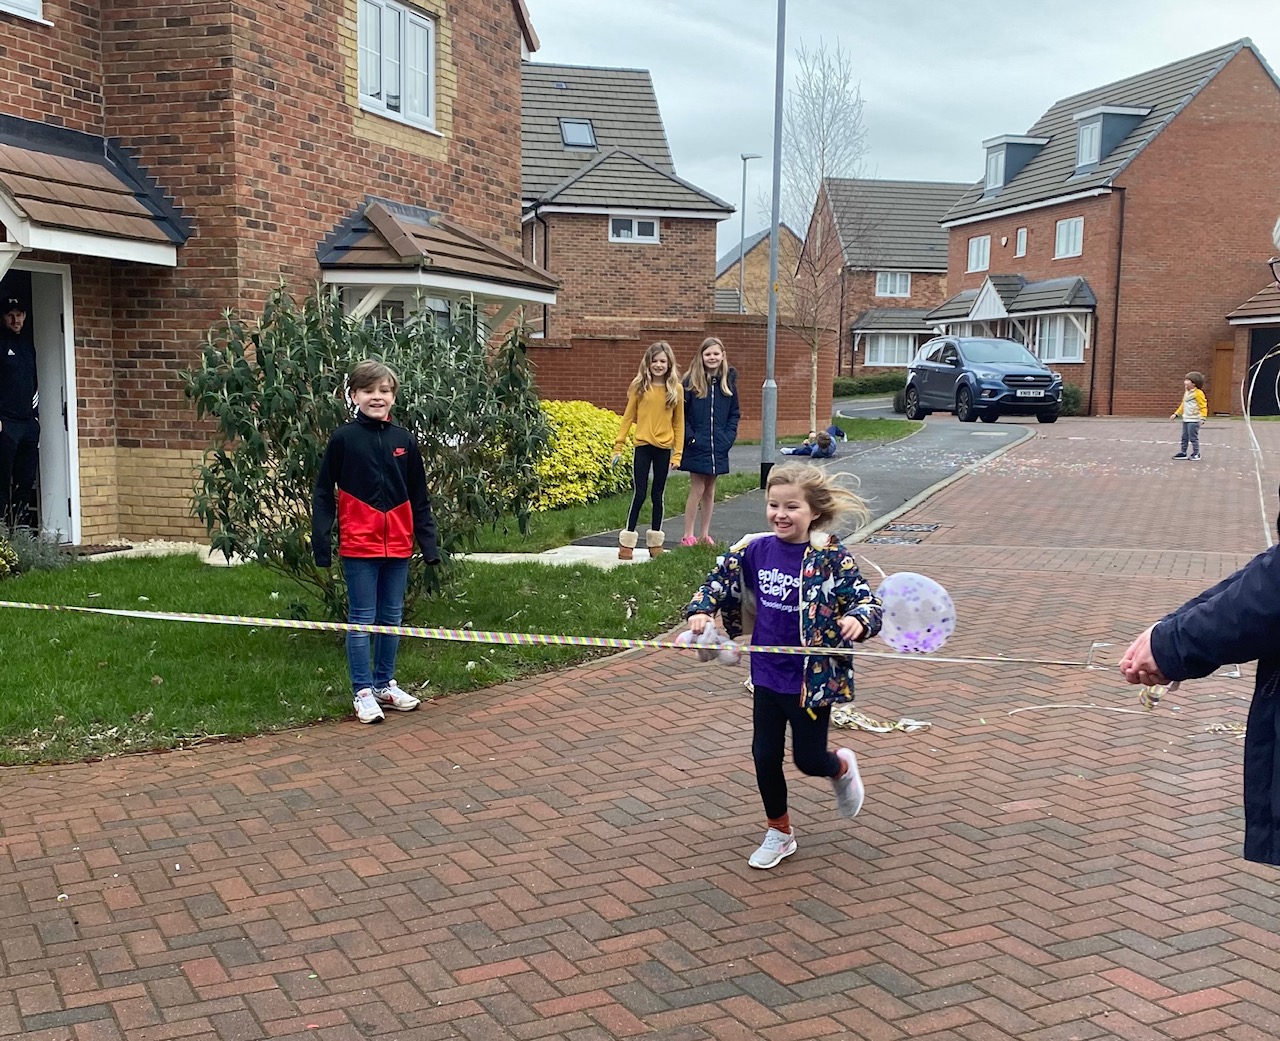 Liliane runs across the finish line, while being watched by friends. She is outside a row of homes and is smiling. She is wearing her purple epilepsy society t-shirt.